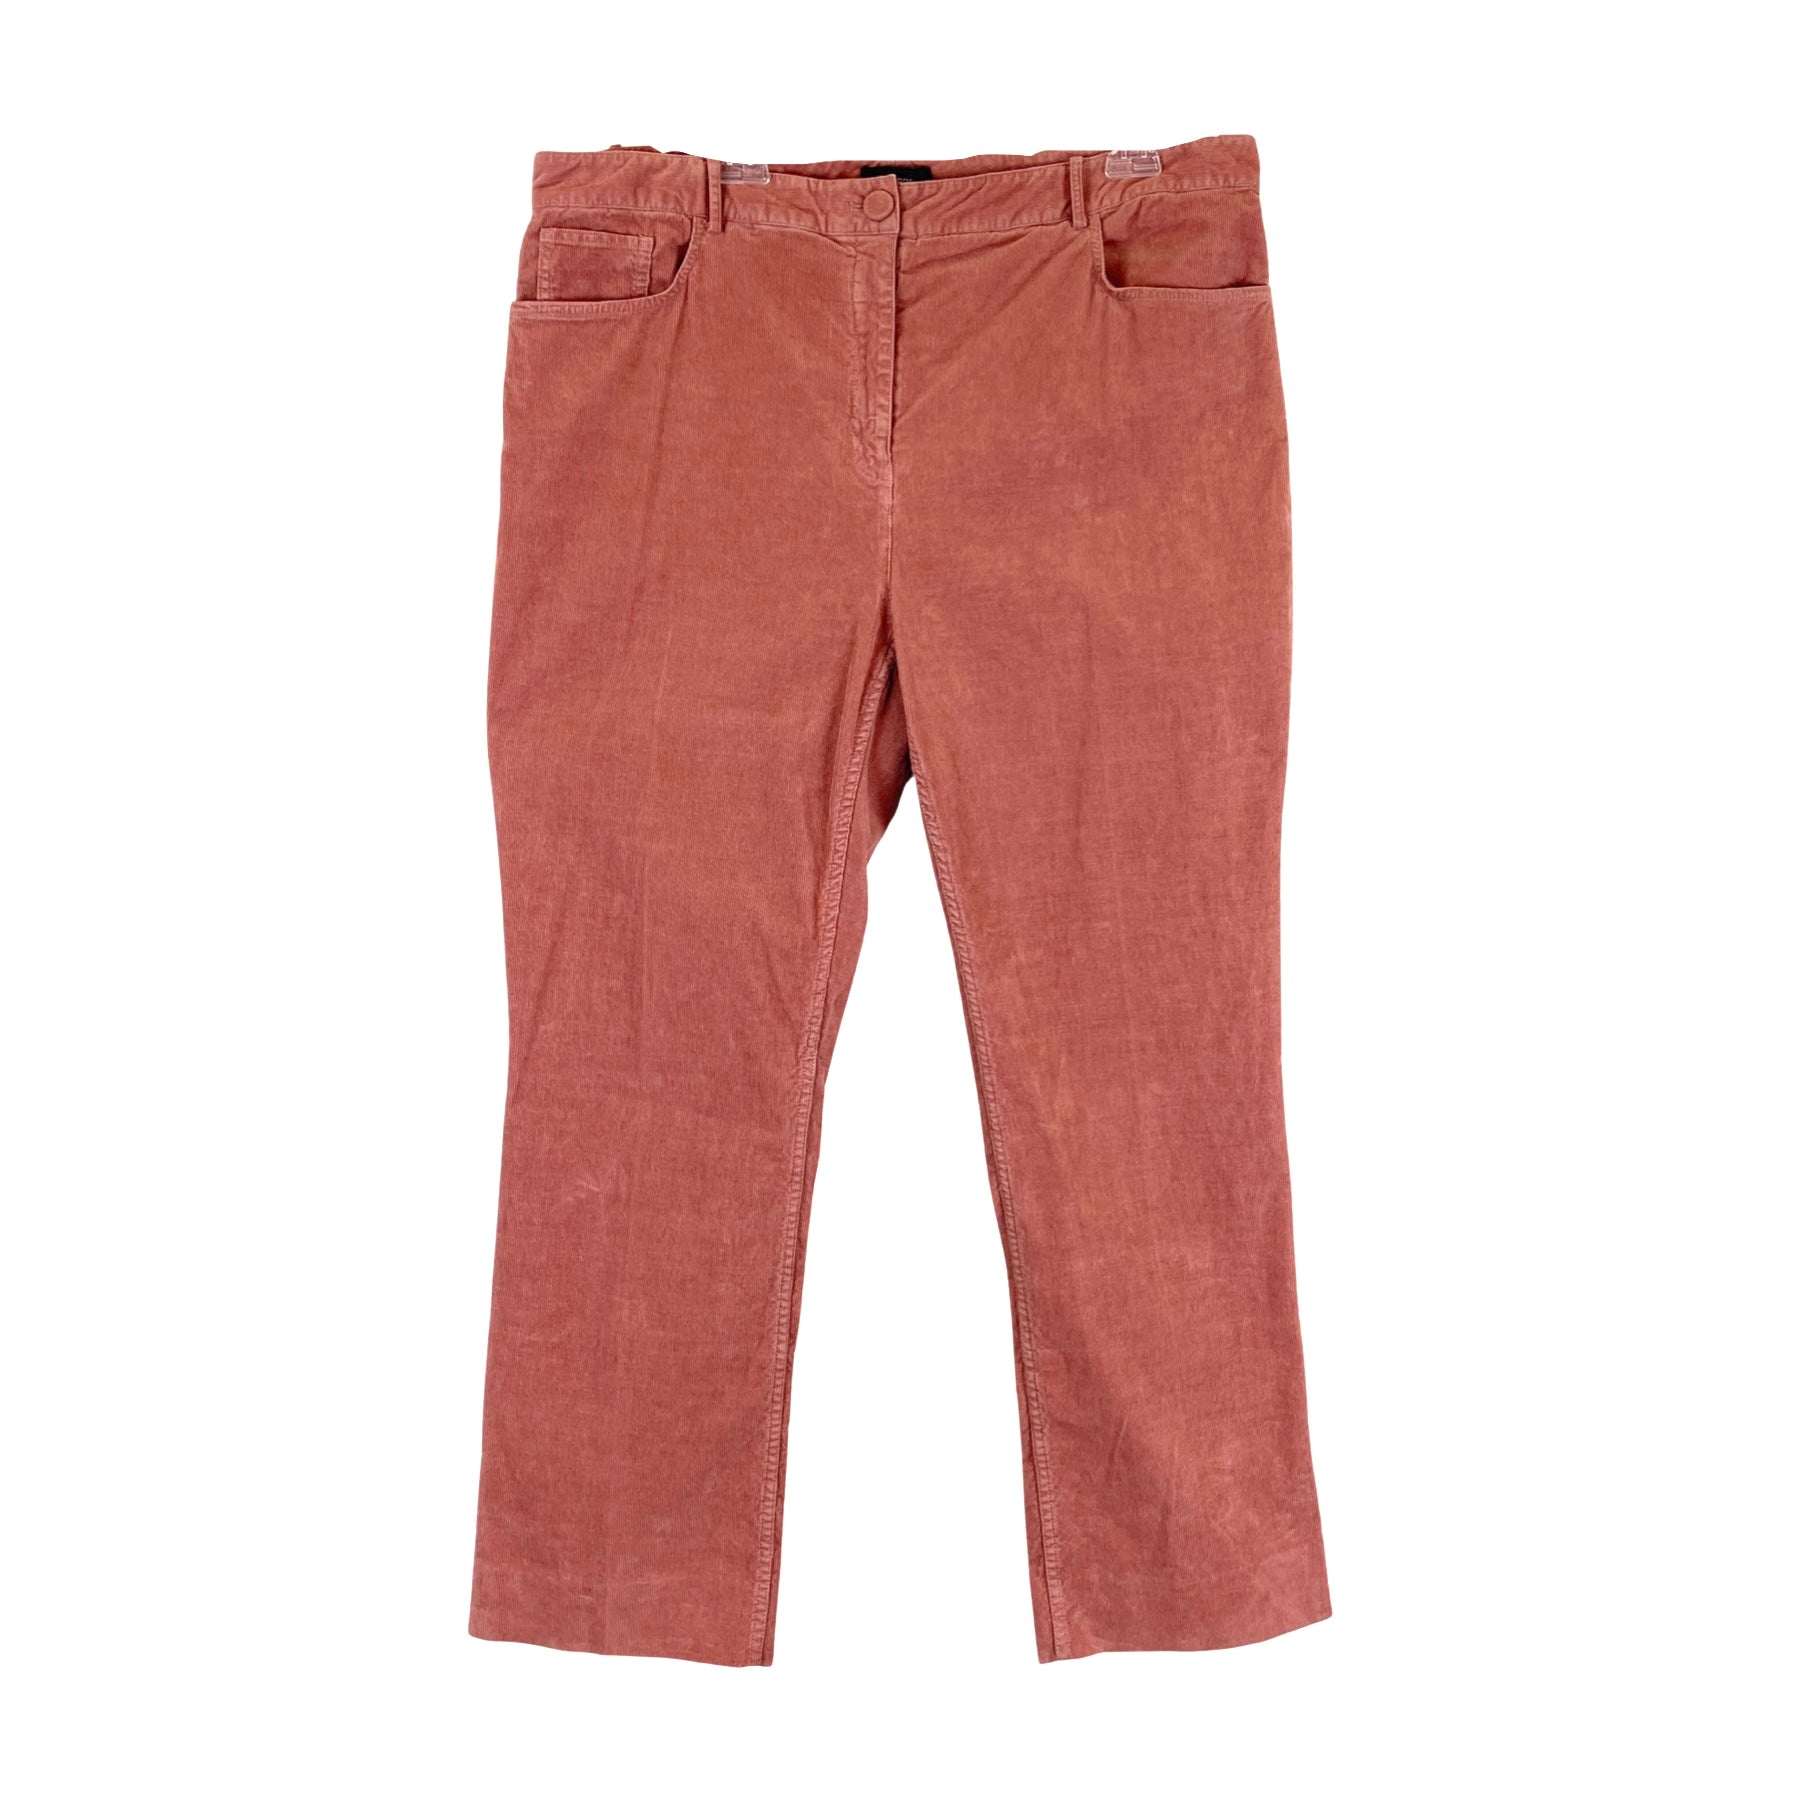 Theory Blossom Corduroy Straight Jeans